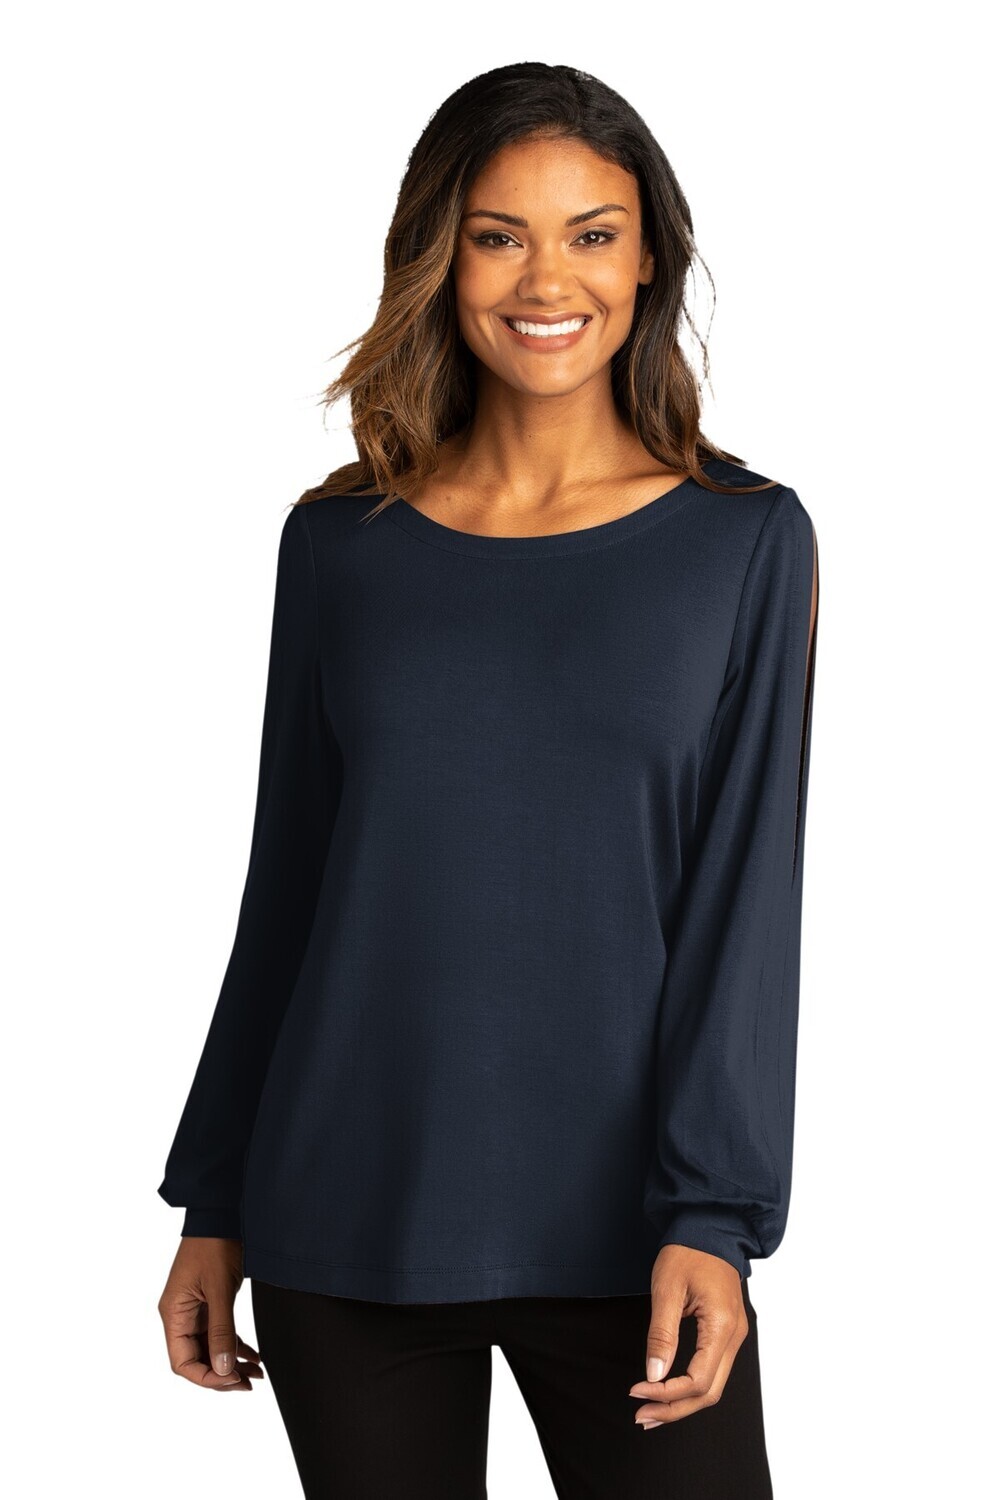 PORT AUTHORITY LADIES LUXE KNIT TOP (LK5600) RIVER NAVY BLUE - 3XL